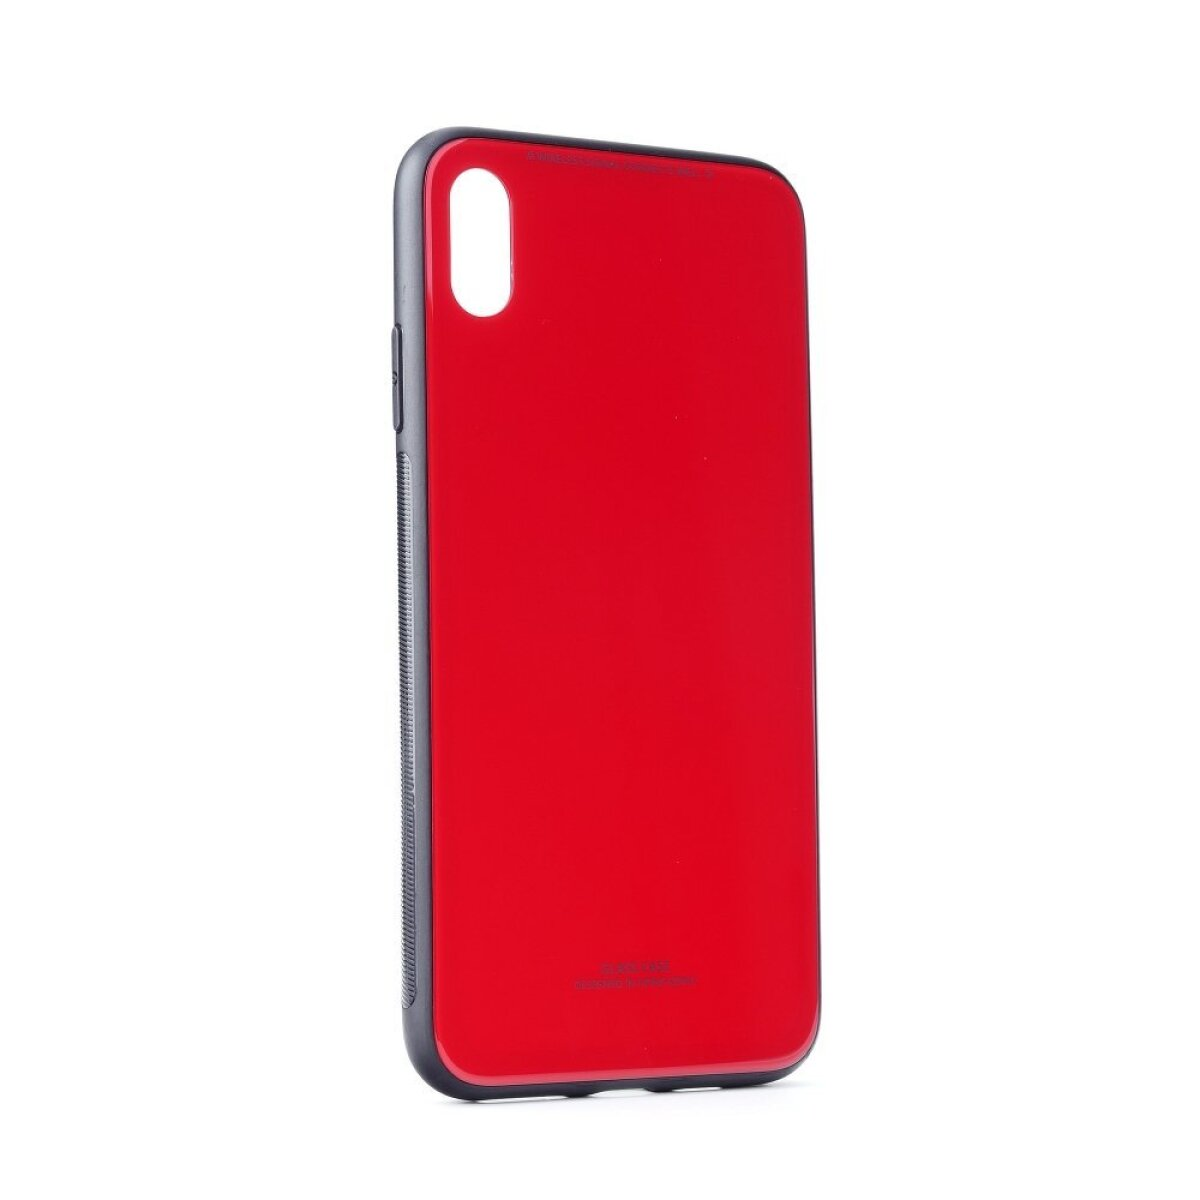 FORCELL GLASS CASE iPhone Schwarz; 11 Max schwarz/rot, iPhone 11 Pro Apple, Pro Rot Bookcover, Max